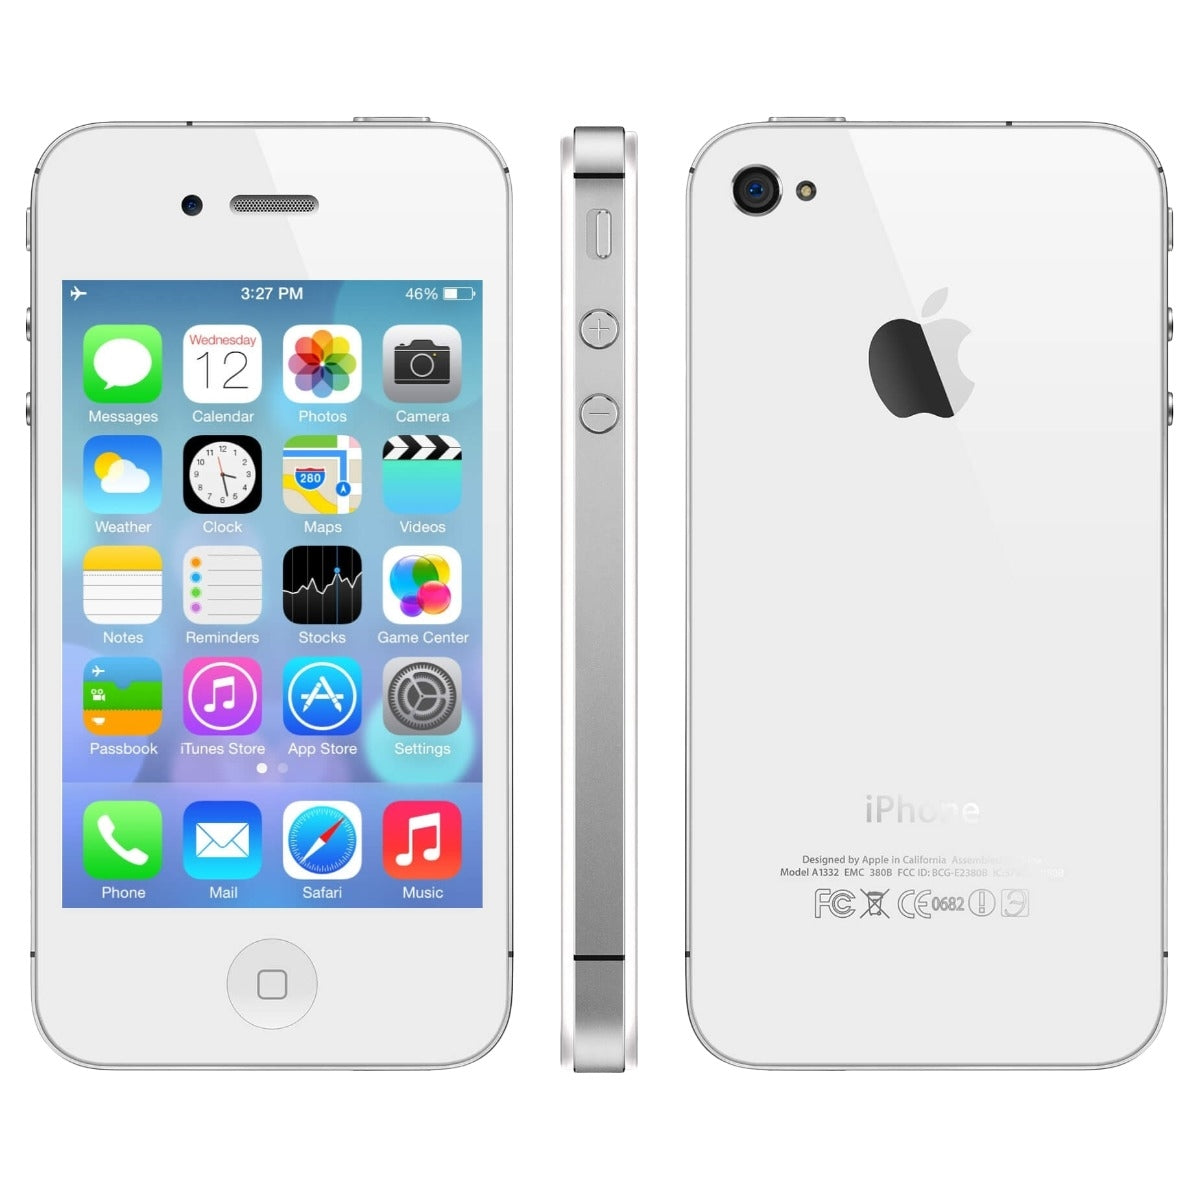 Apple iPhone 4S Factory Unlocked - Assorted Colors and Sizes / White / 32GB